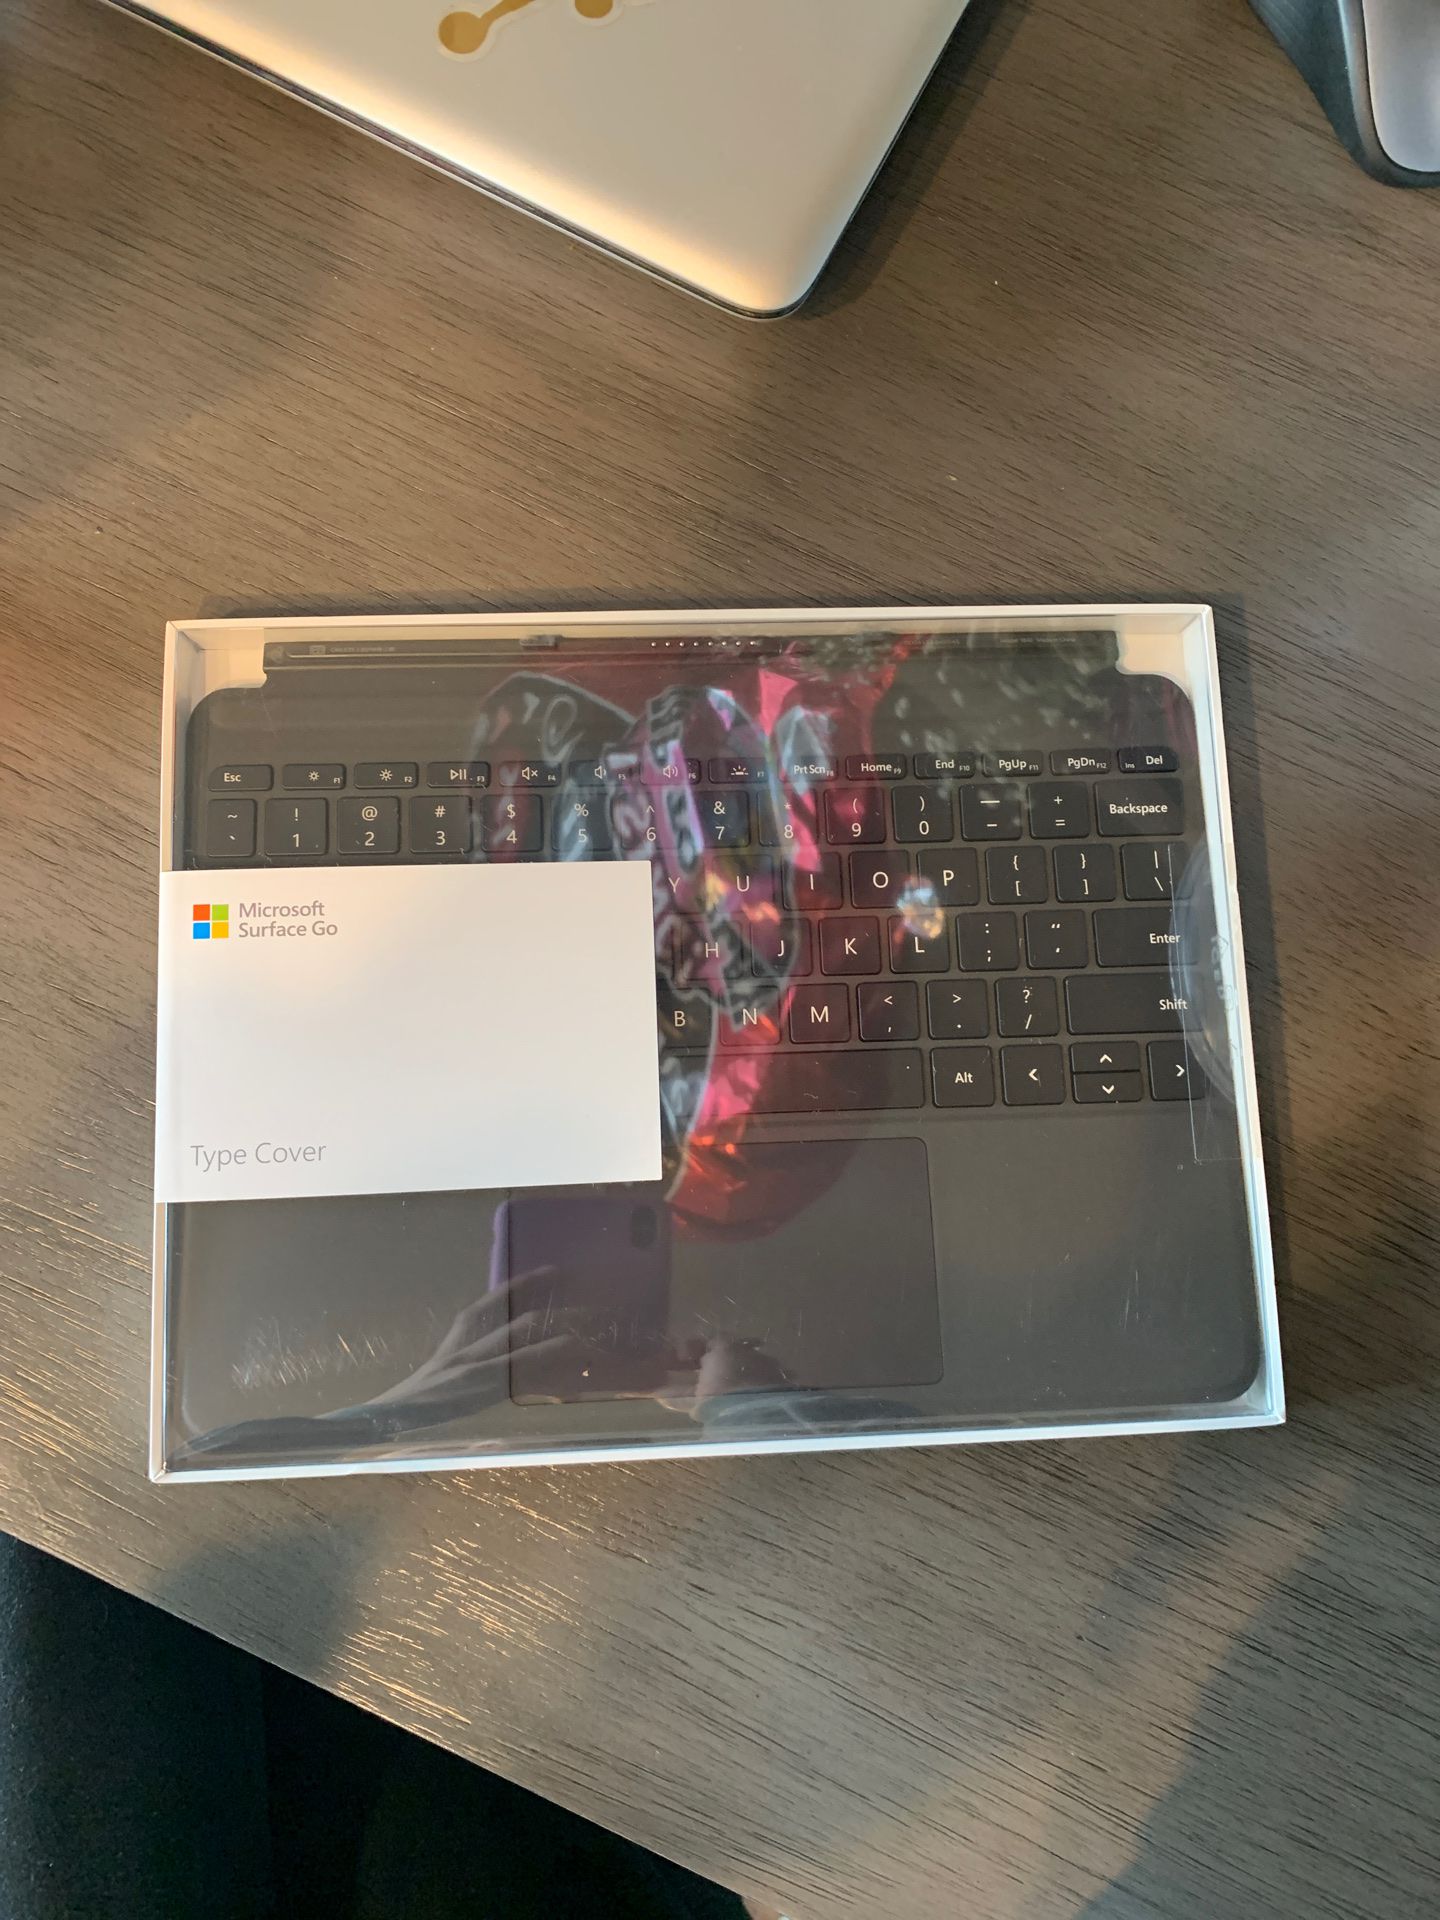 Microsoft surface go type cover